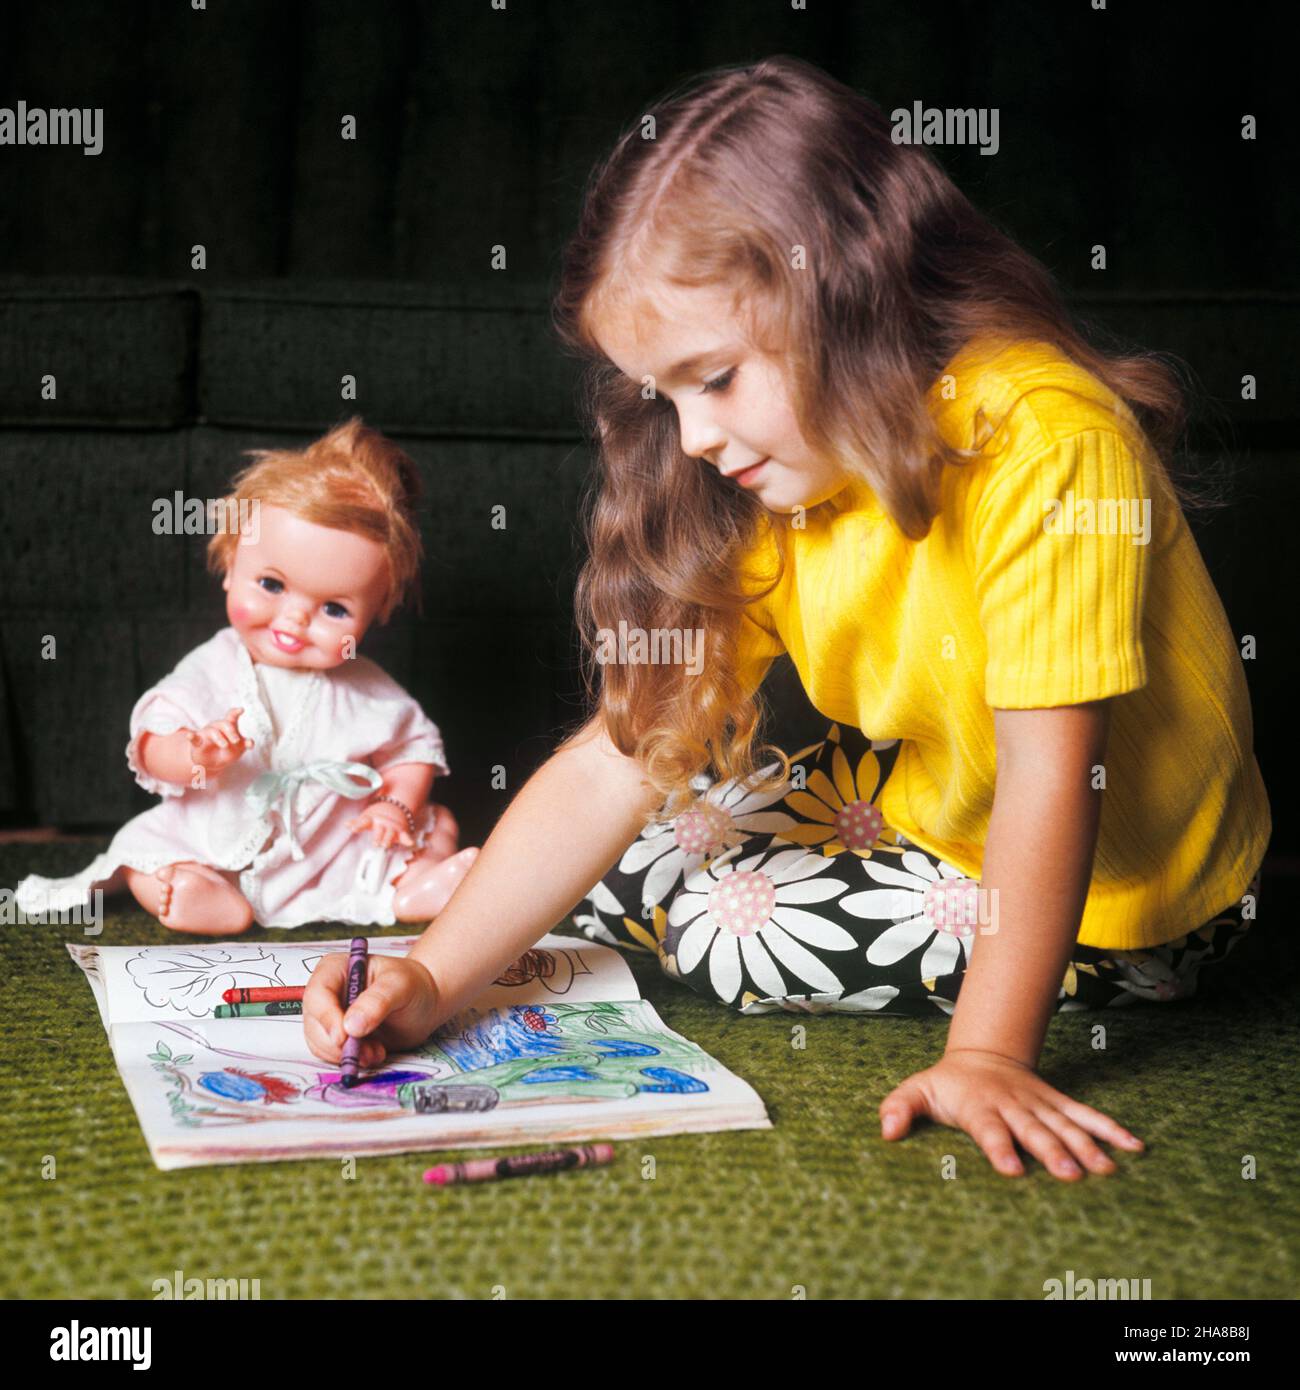 1970s LITTLE GIRL SITTING ON FLOOR WITH HER DOLL COLORING IN COLORING BOOK WITH CRAYONS WEARING YELLOW TOP AND DAISY PRINT PANTS - kj4550 HAR001 HARS HEALTHINESS HOME LIFE COPY SPACE HALF-LENGTH DAISY HAPPINESS AND CRAYONS COLORING BOOK CONTENT IMAGINATION CALM PLEASANT AGREEABLE CHARMING CREATIVITY JUVENILES LOVABLE PLEASING ADORABLE APPEALING CAUCASIAN ETHNICITY COLORING HAR001 OLD FASHIONED Stock Photo